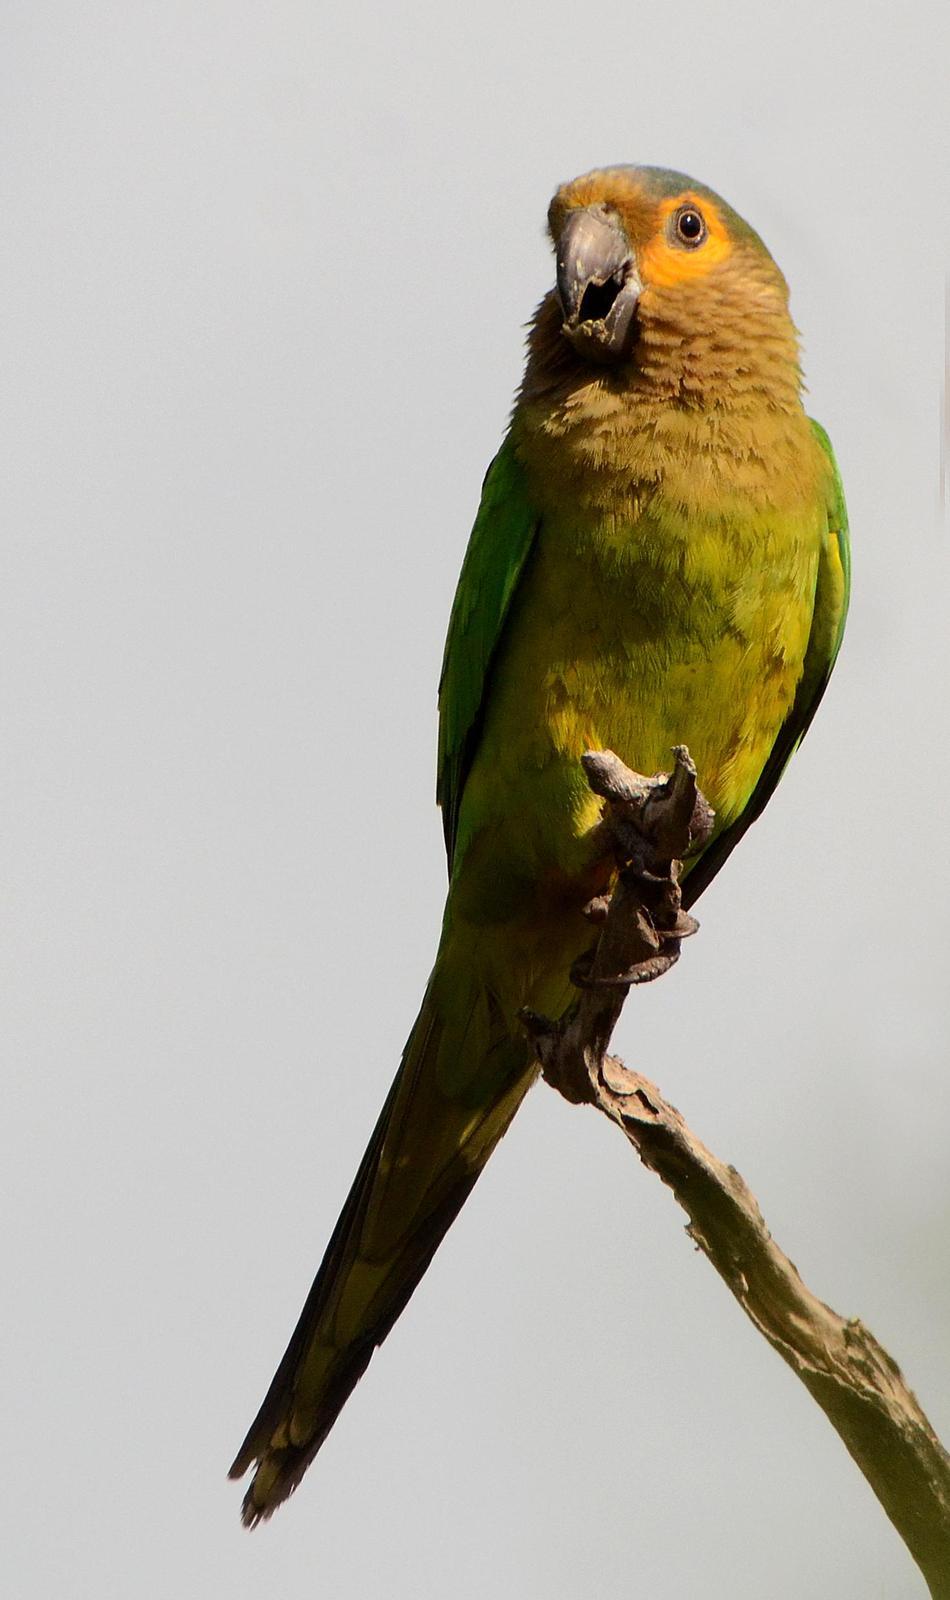 Brown-throated Parakeet Photo by Steven Mlodinow